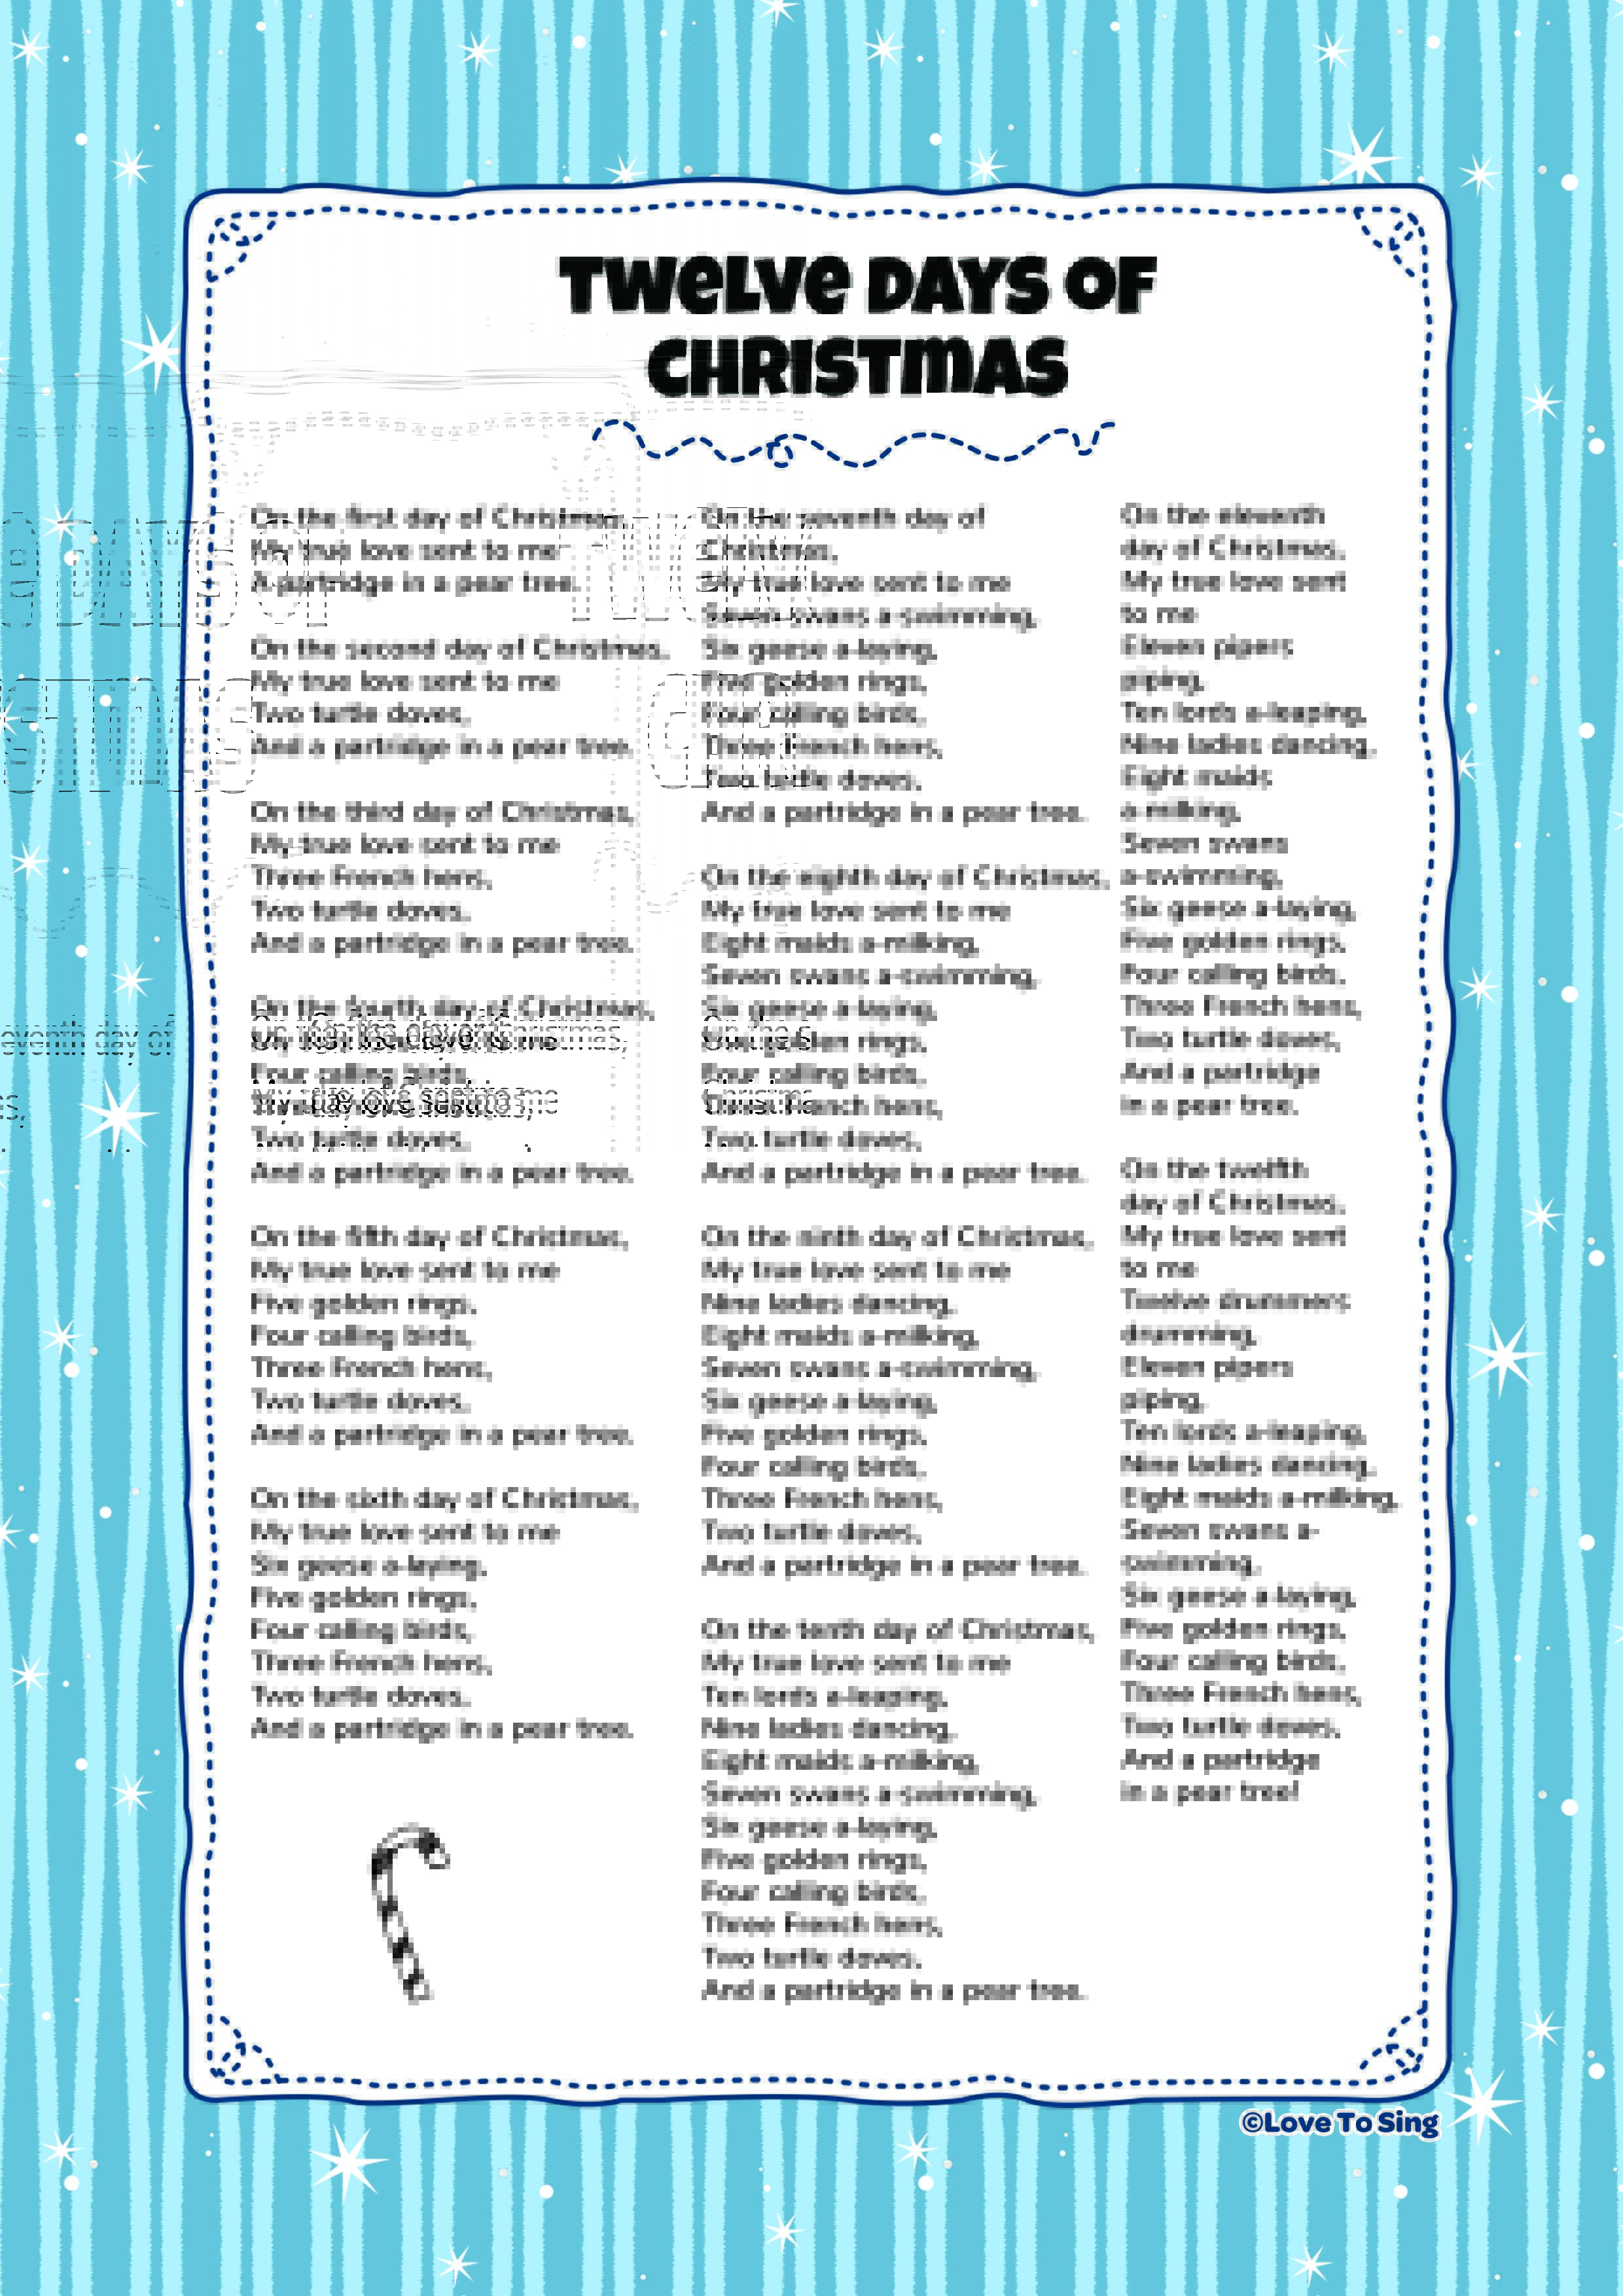 What Is The Meaning Of The 12 Days Of Christmas Song Lyrics - Printable ...